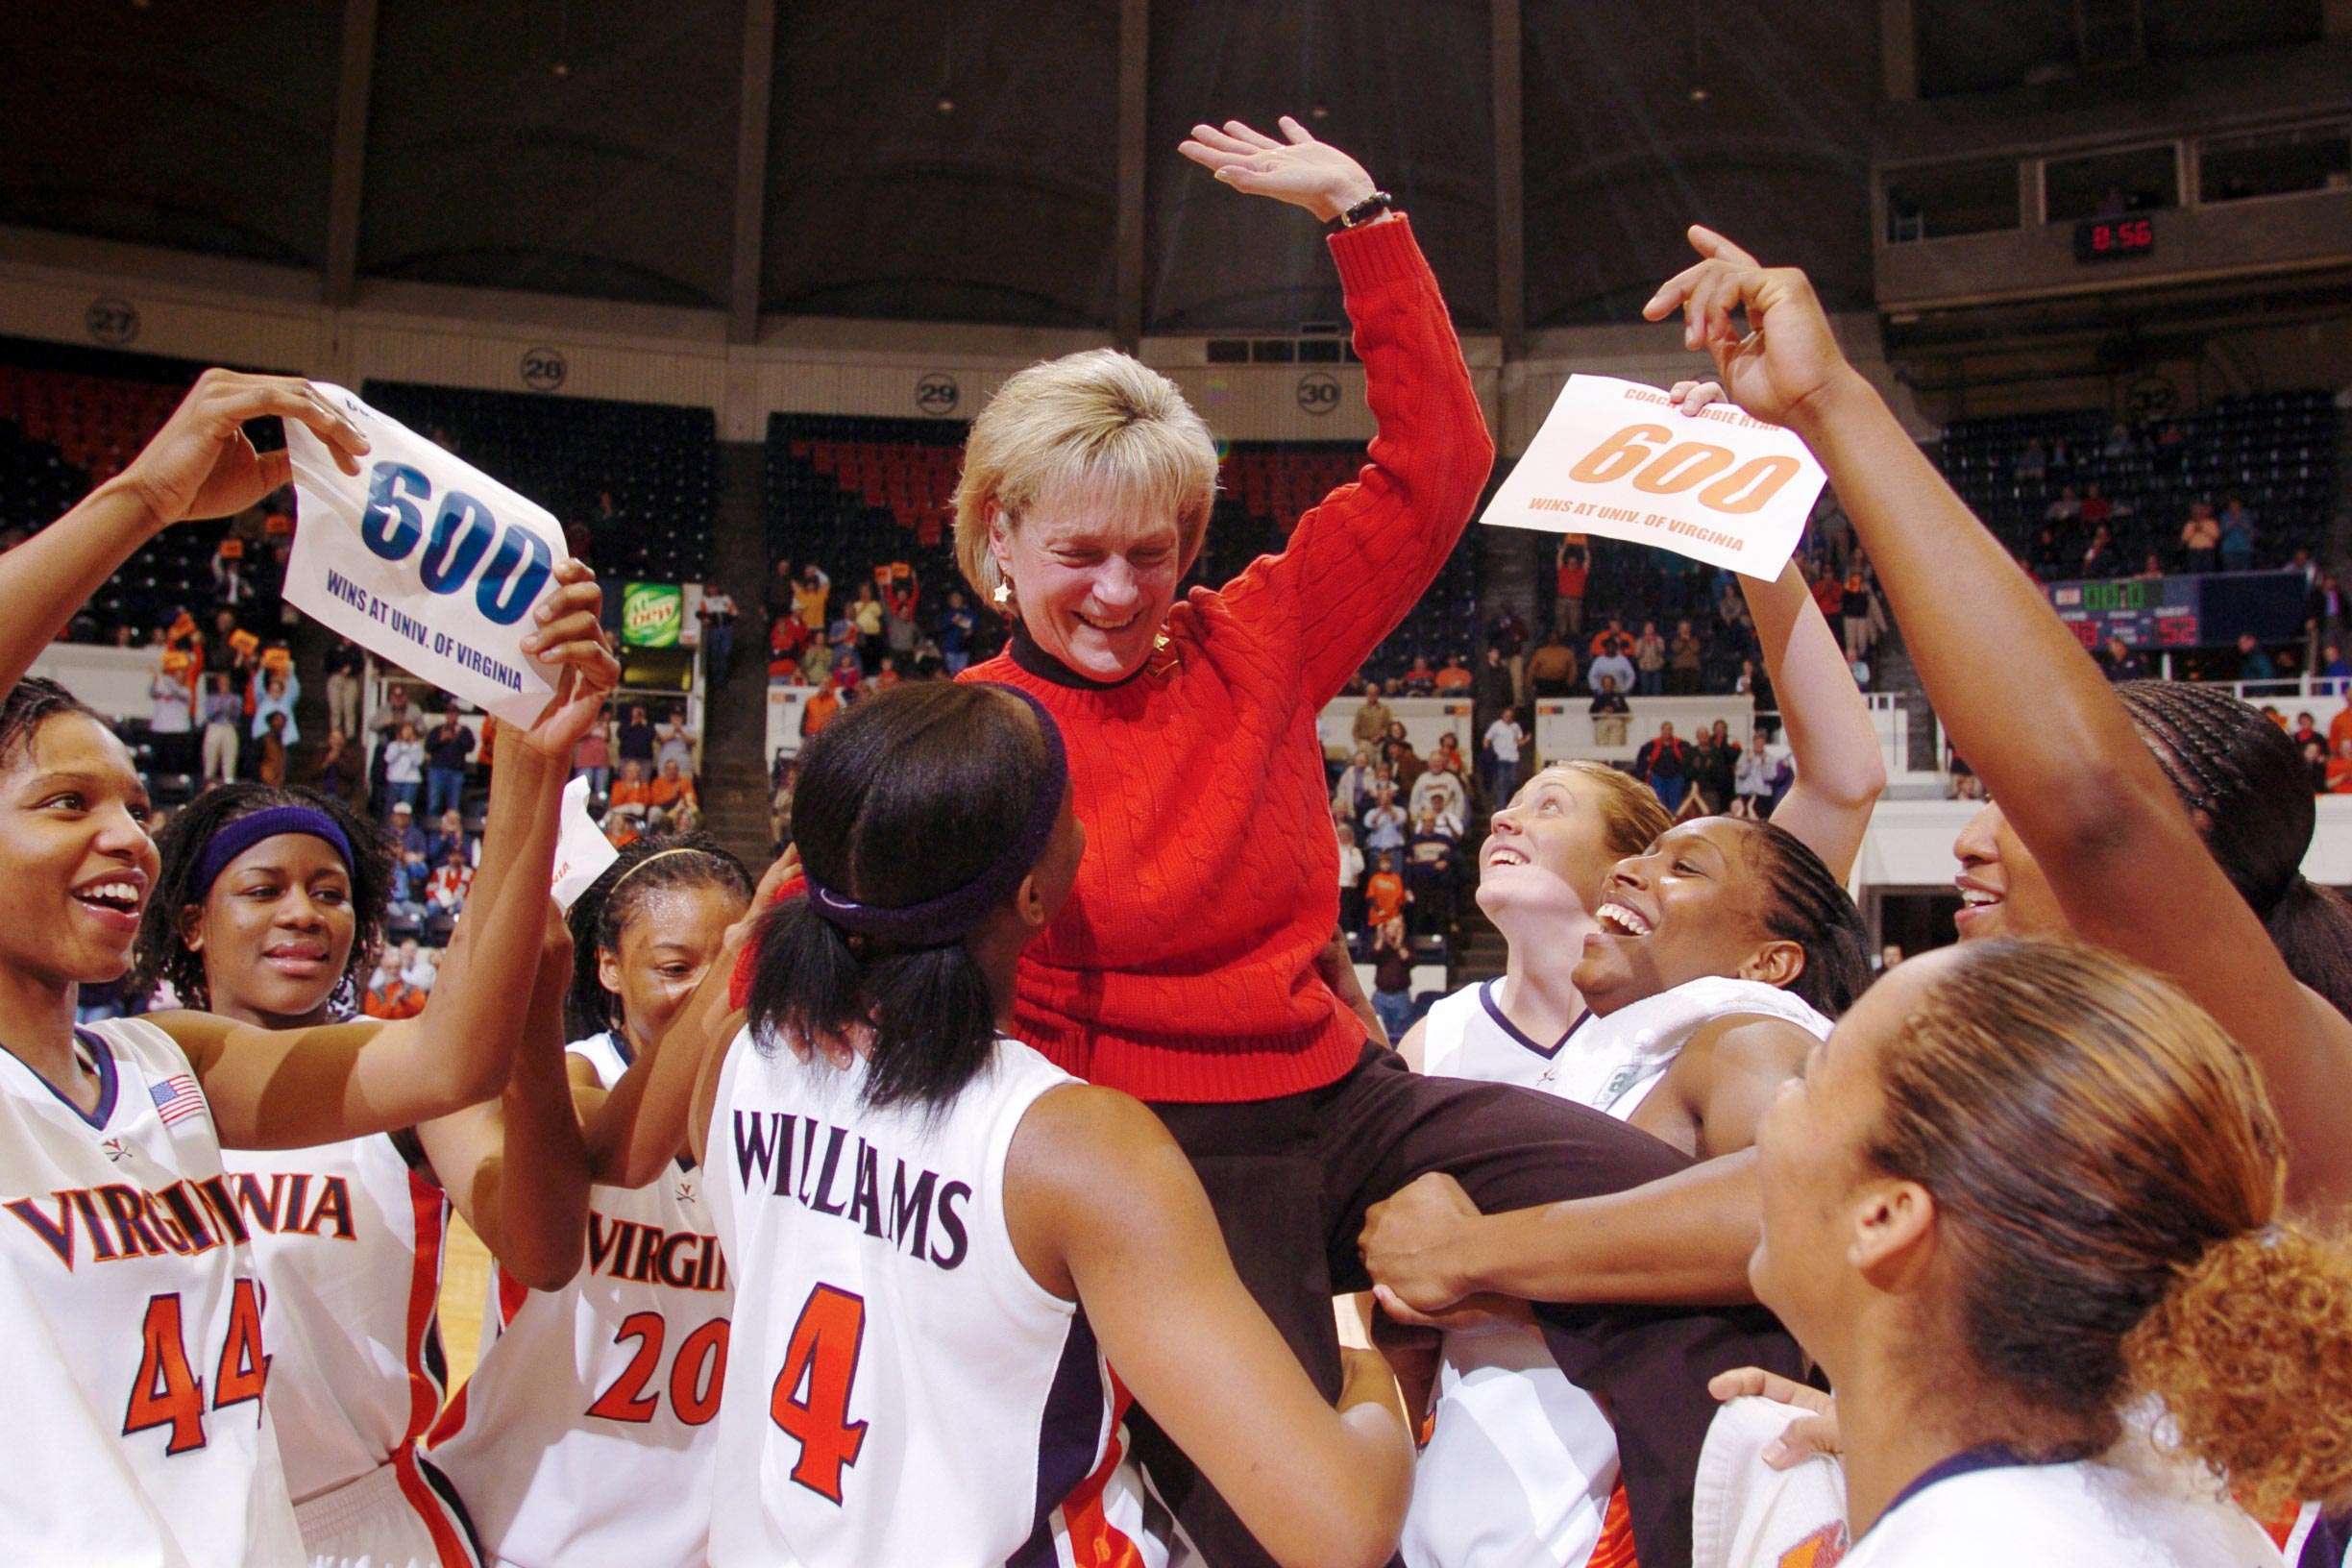 Debbie Ryan being lifted into the air by the Womans basketball team